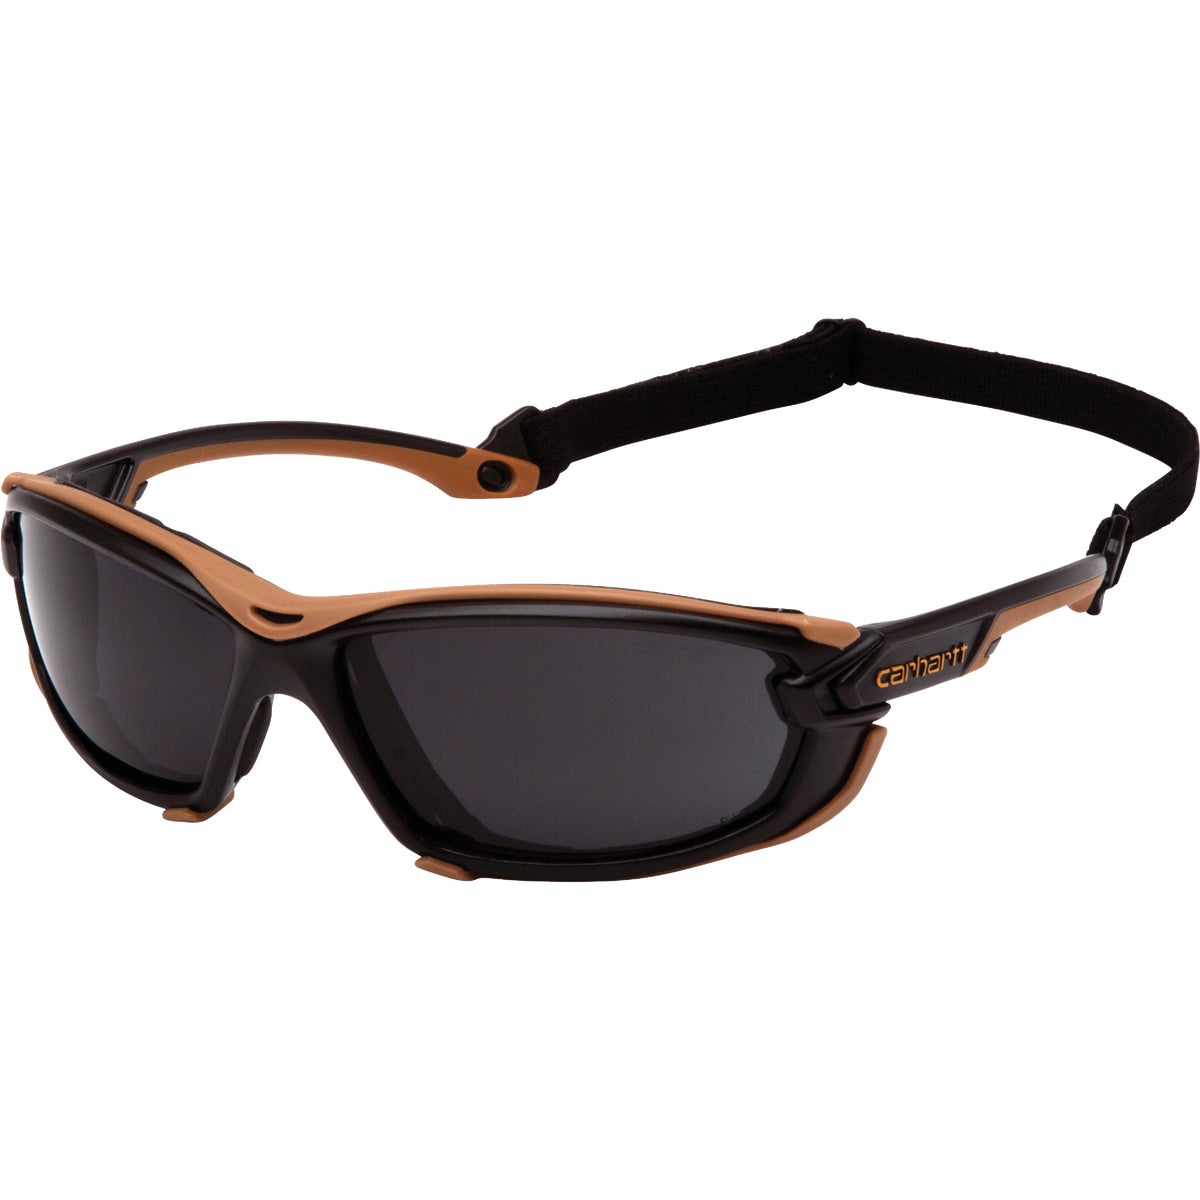 Carhartt Toccoa Black & Tan Frame Safety Glasses with Gray H2MAX Anti-Fog Lenses